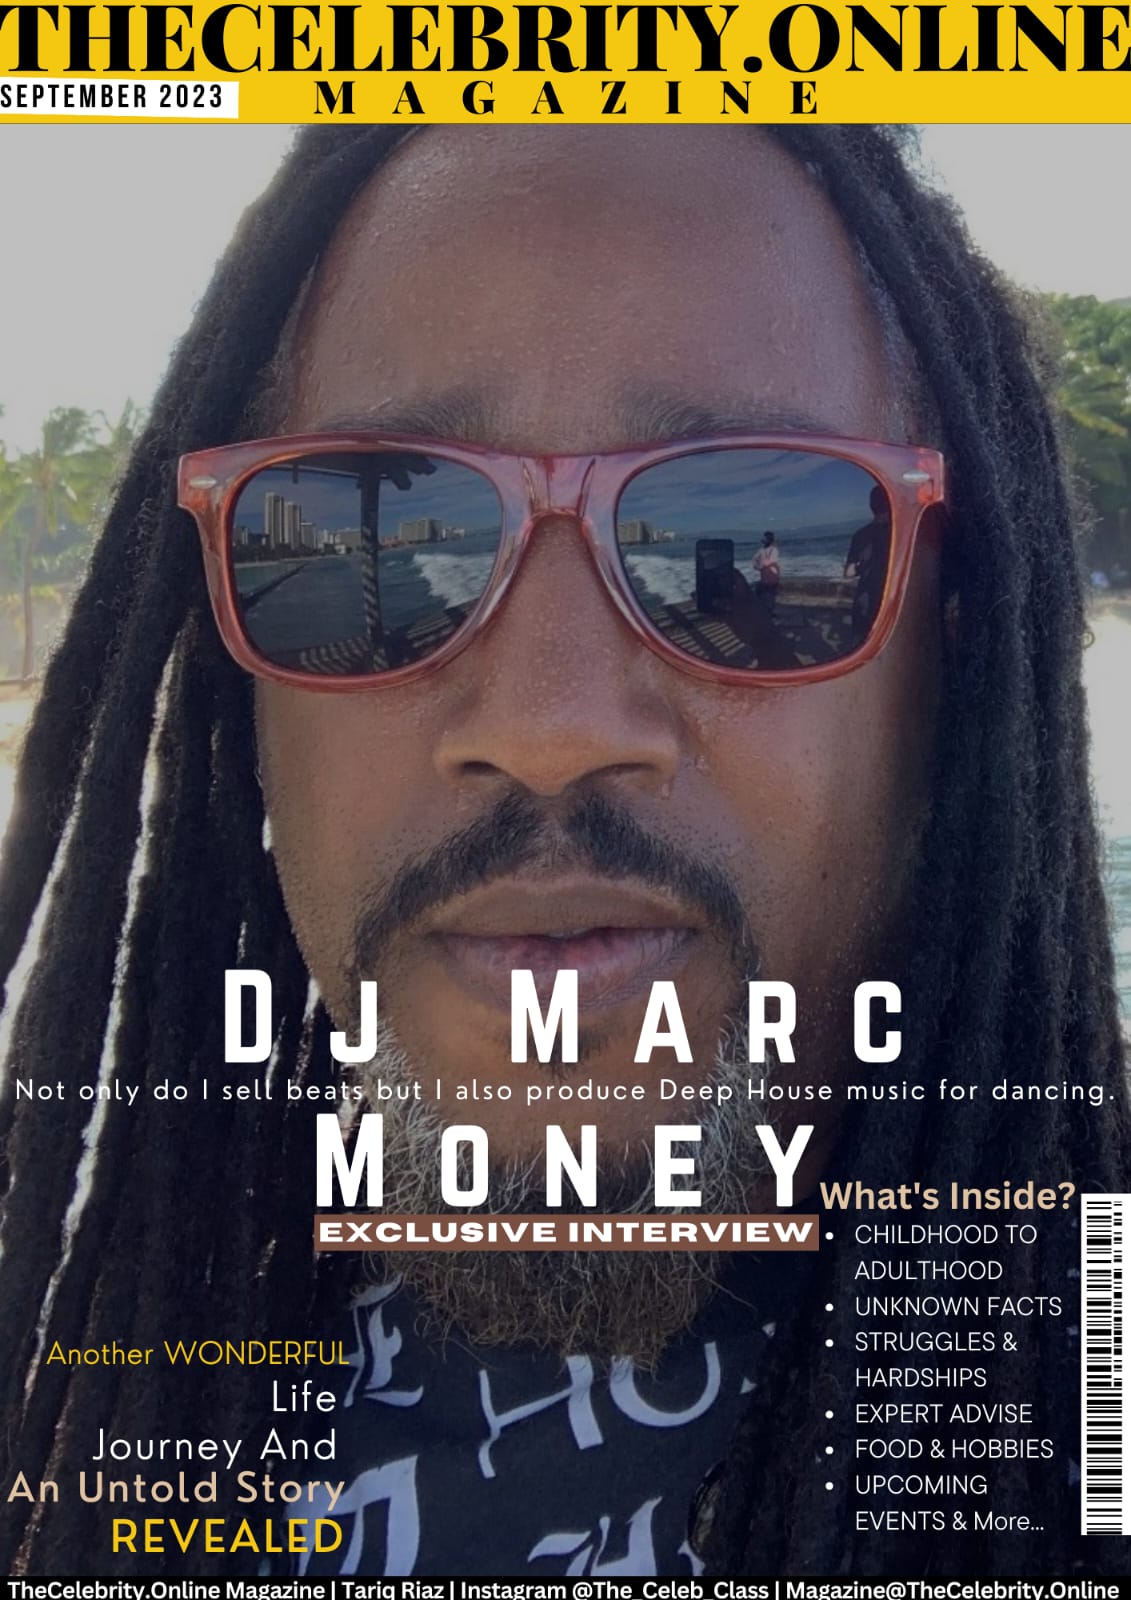 Dj Marc Money Exclusive Interview – ‘I’m releasing my 7th beat pack from the Money Beatz series on my birthday 10-13-23’